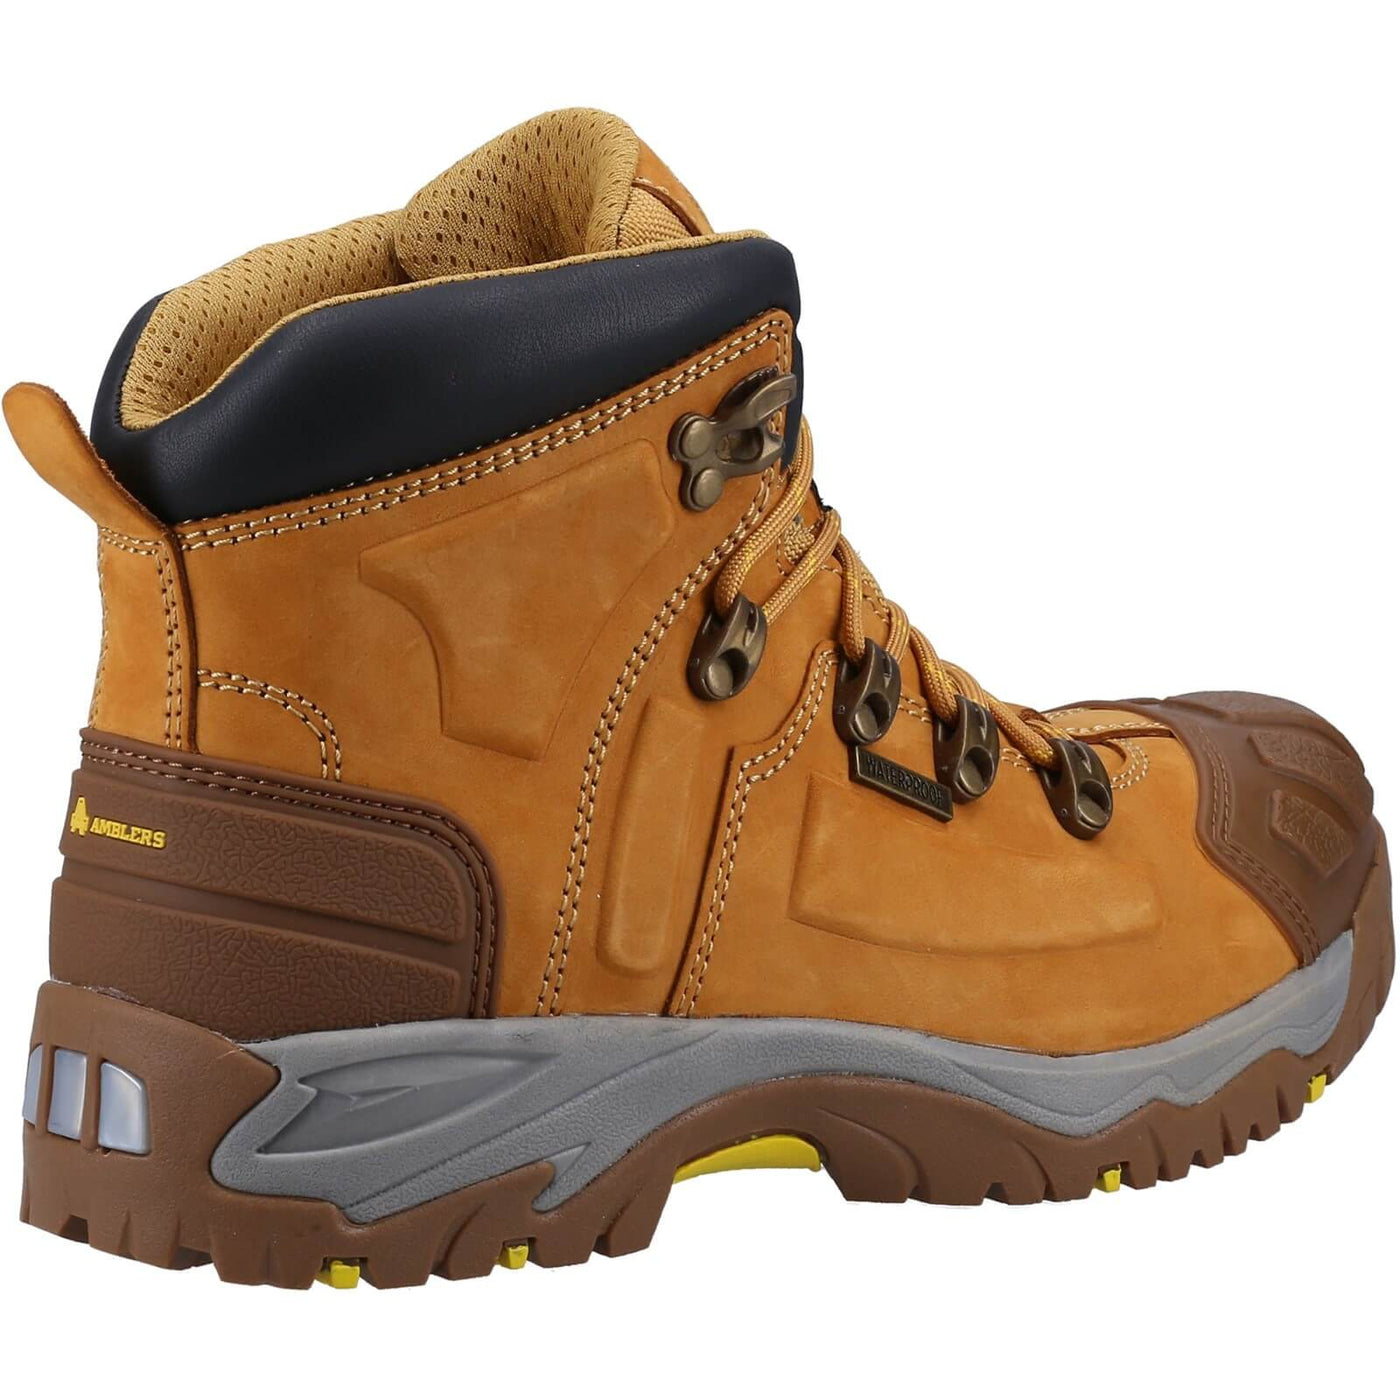 Amblers 33 Waterproof Safety Boots Honey 2#colour_honey